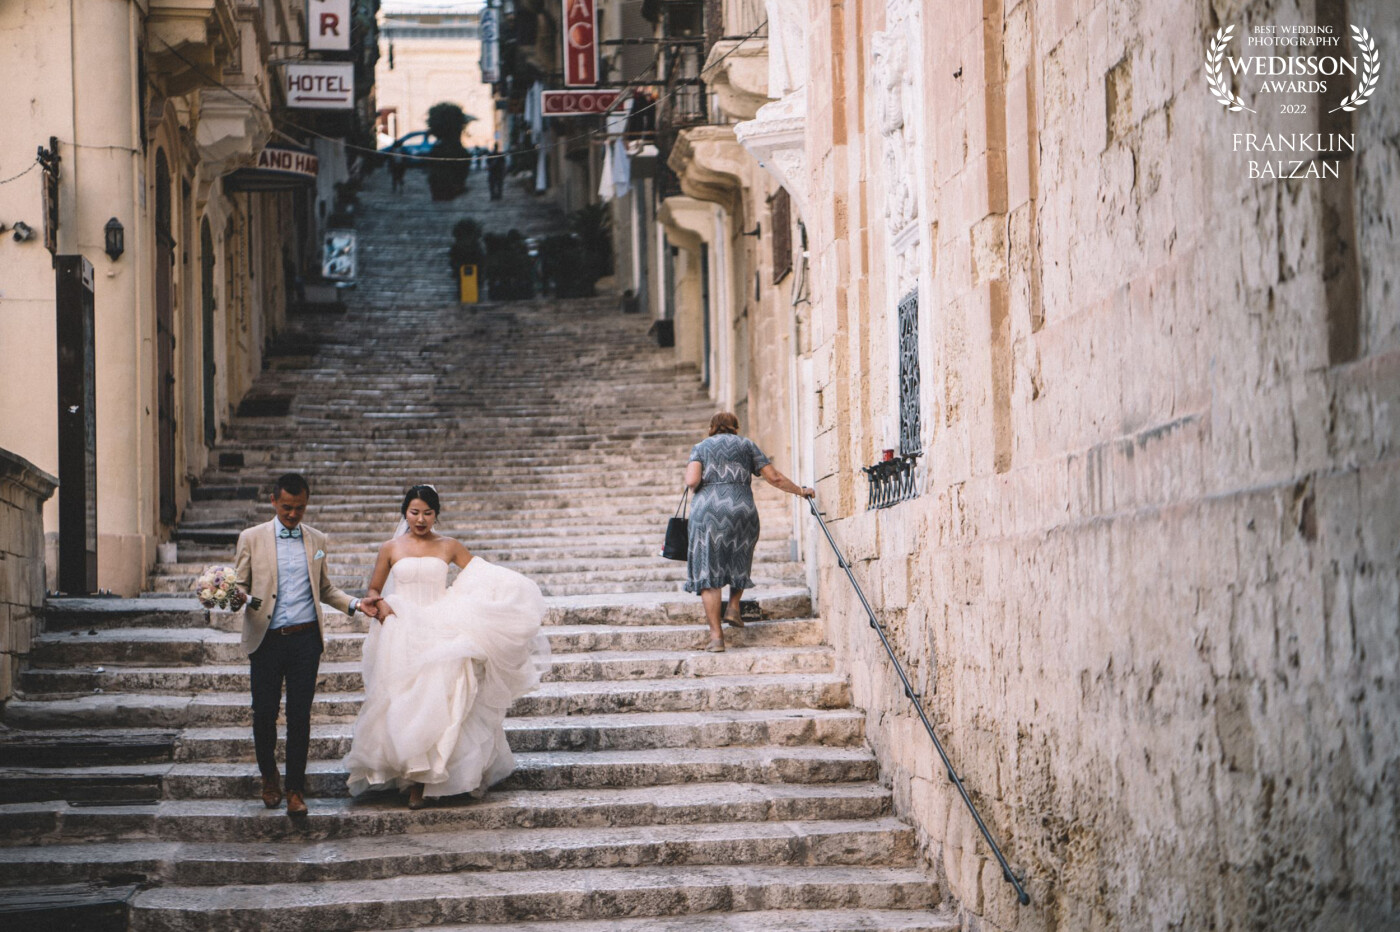 A quiet moment of movement in our capital city of Valletta... As soon as I saw the elderly lady going up the stairs I noted the elegance of the wedding couple contrasting so well with the old city vibes.